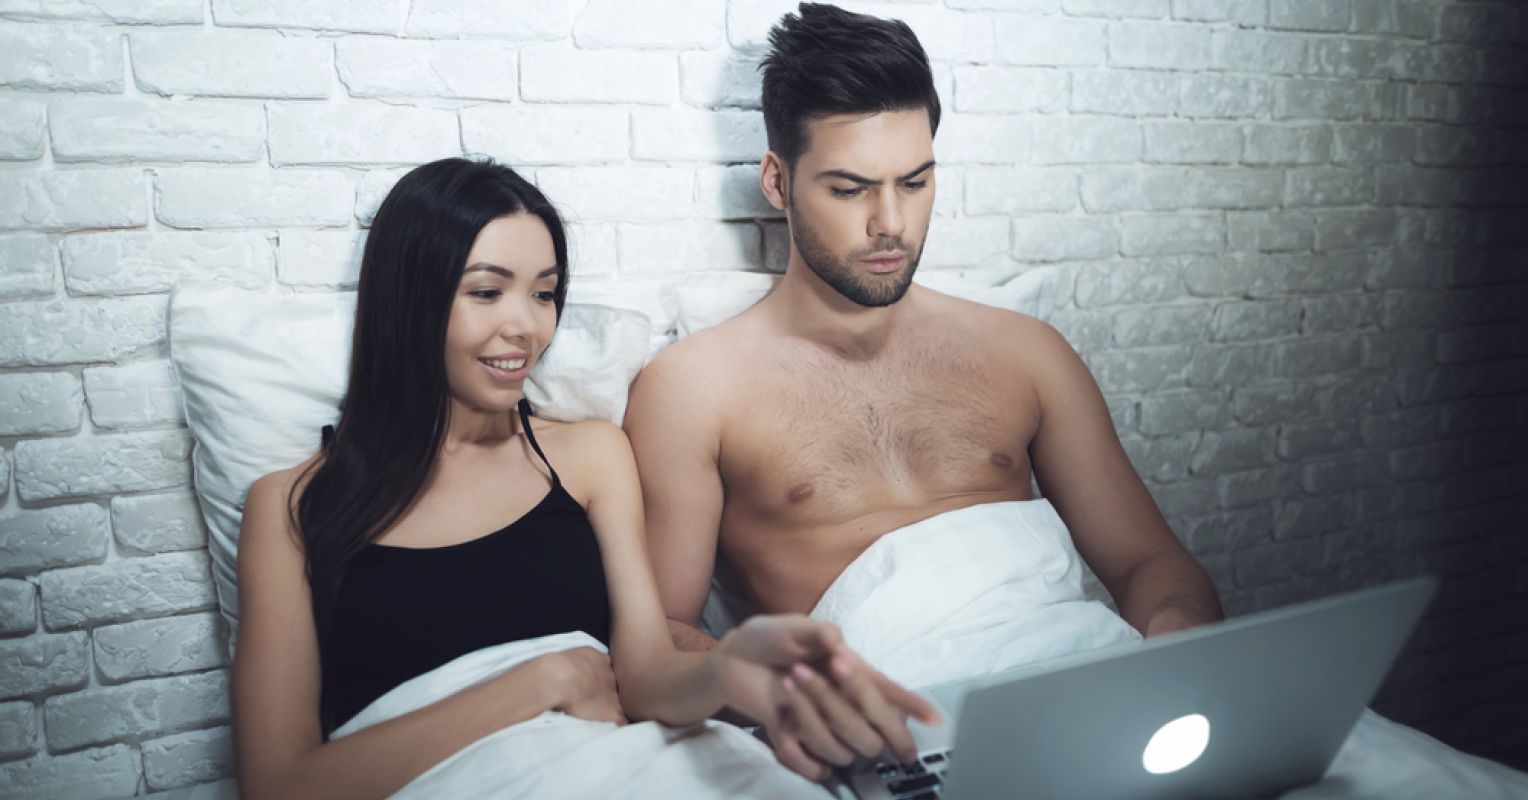 why do married men watch porn